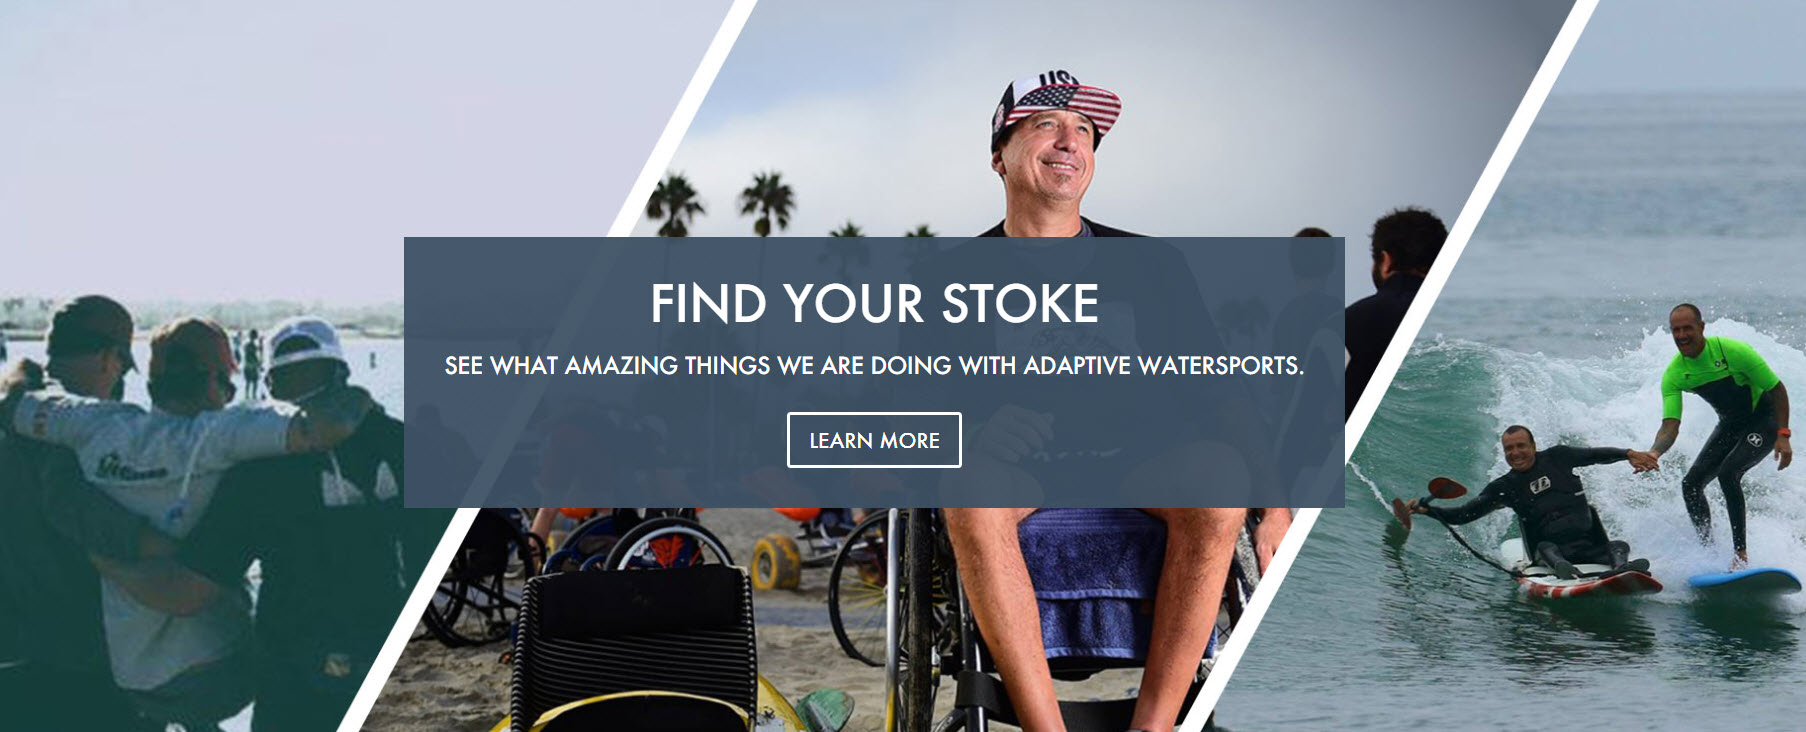 stoke for life website adaptive surfing cure nation